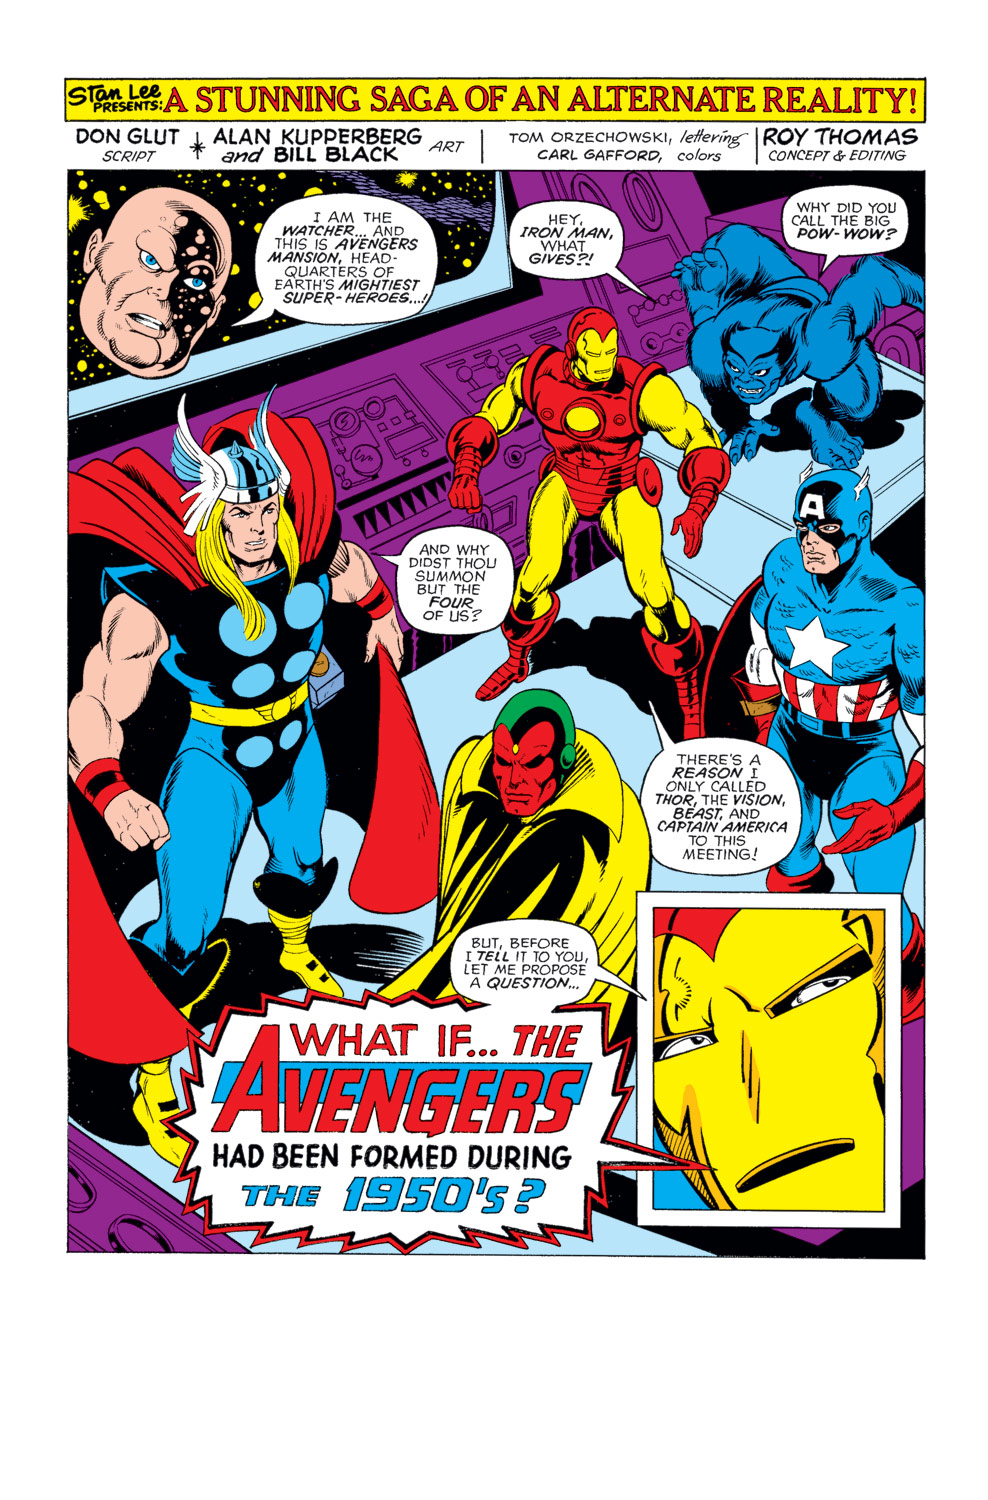 What If? (1977) Issue #9 - The Avengers had fought during the 1950's #9 - English 2